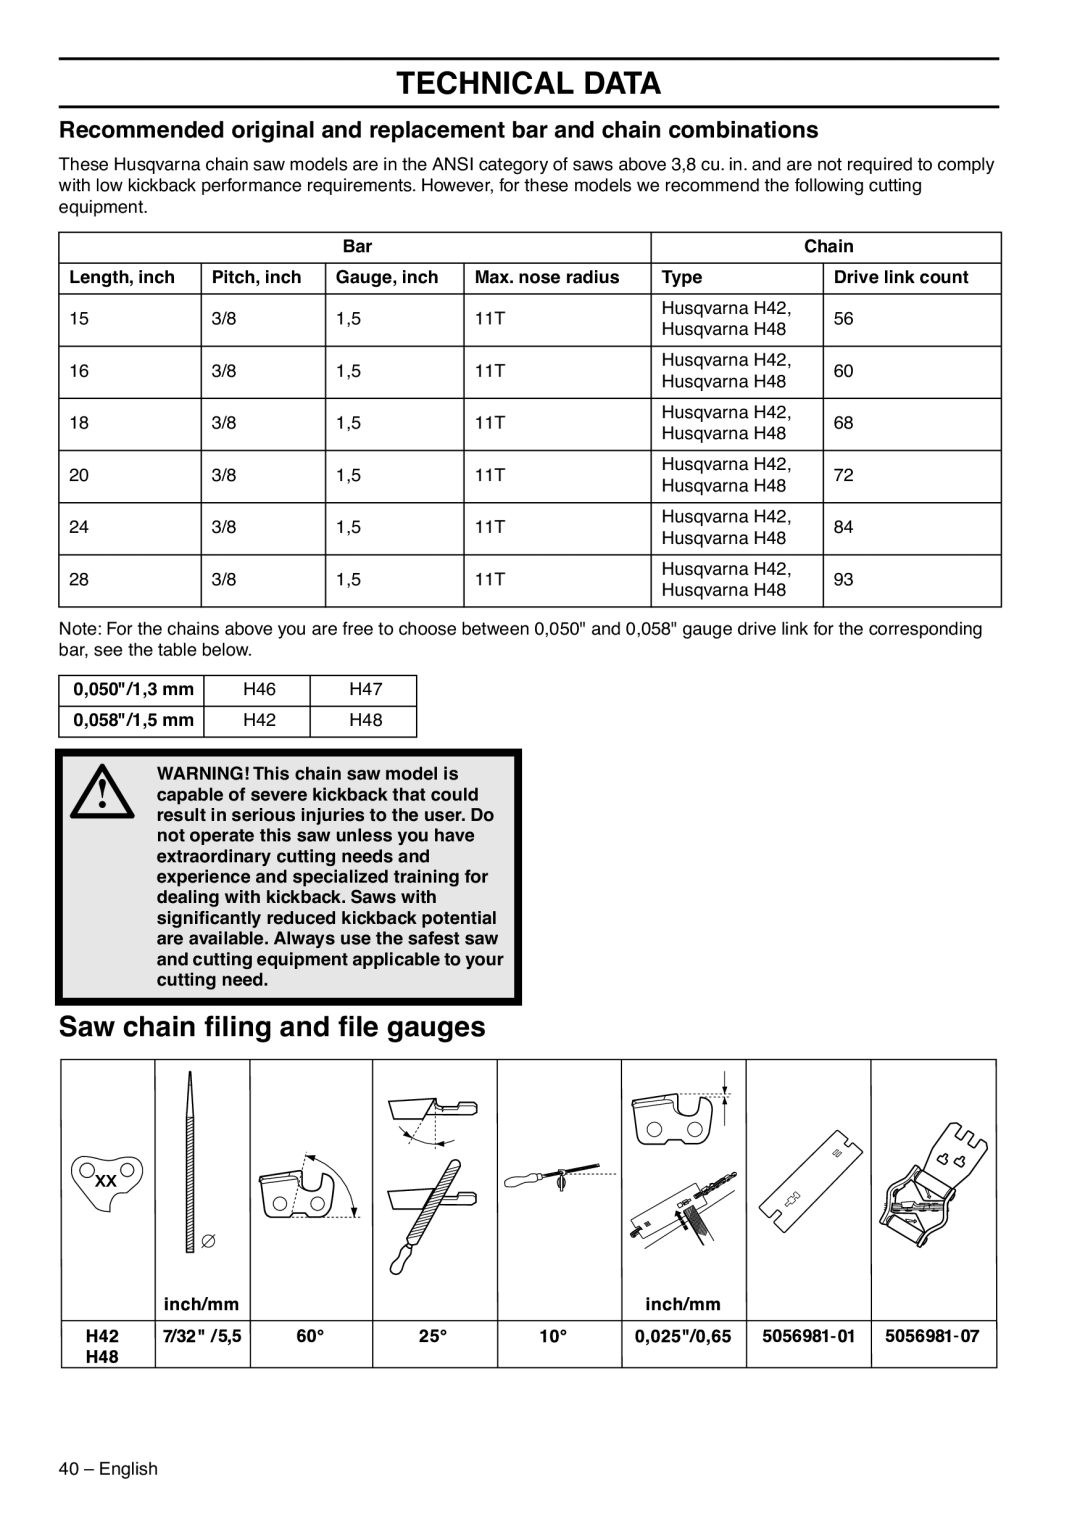 Husqvarna 372XP EPA III Saw chain ﬁling and ﬁle gauges, Recommended original and replacement bar and chain combinations 